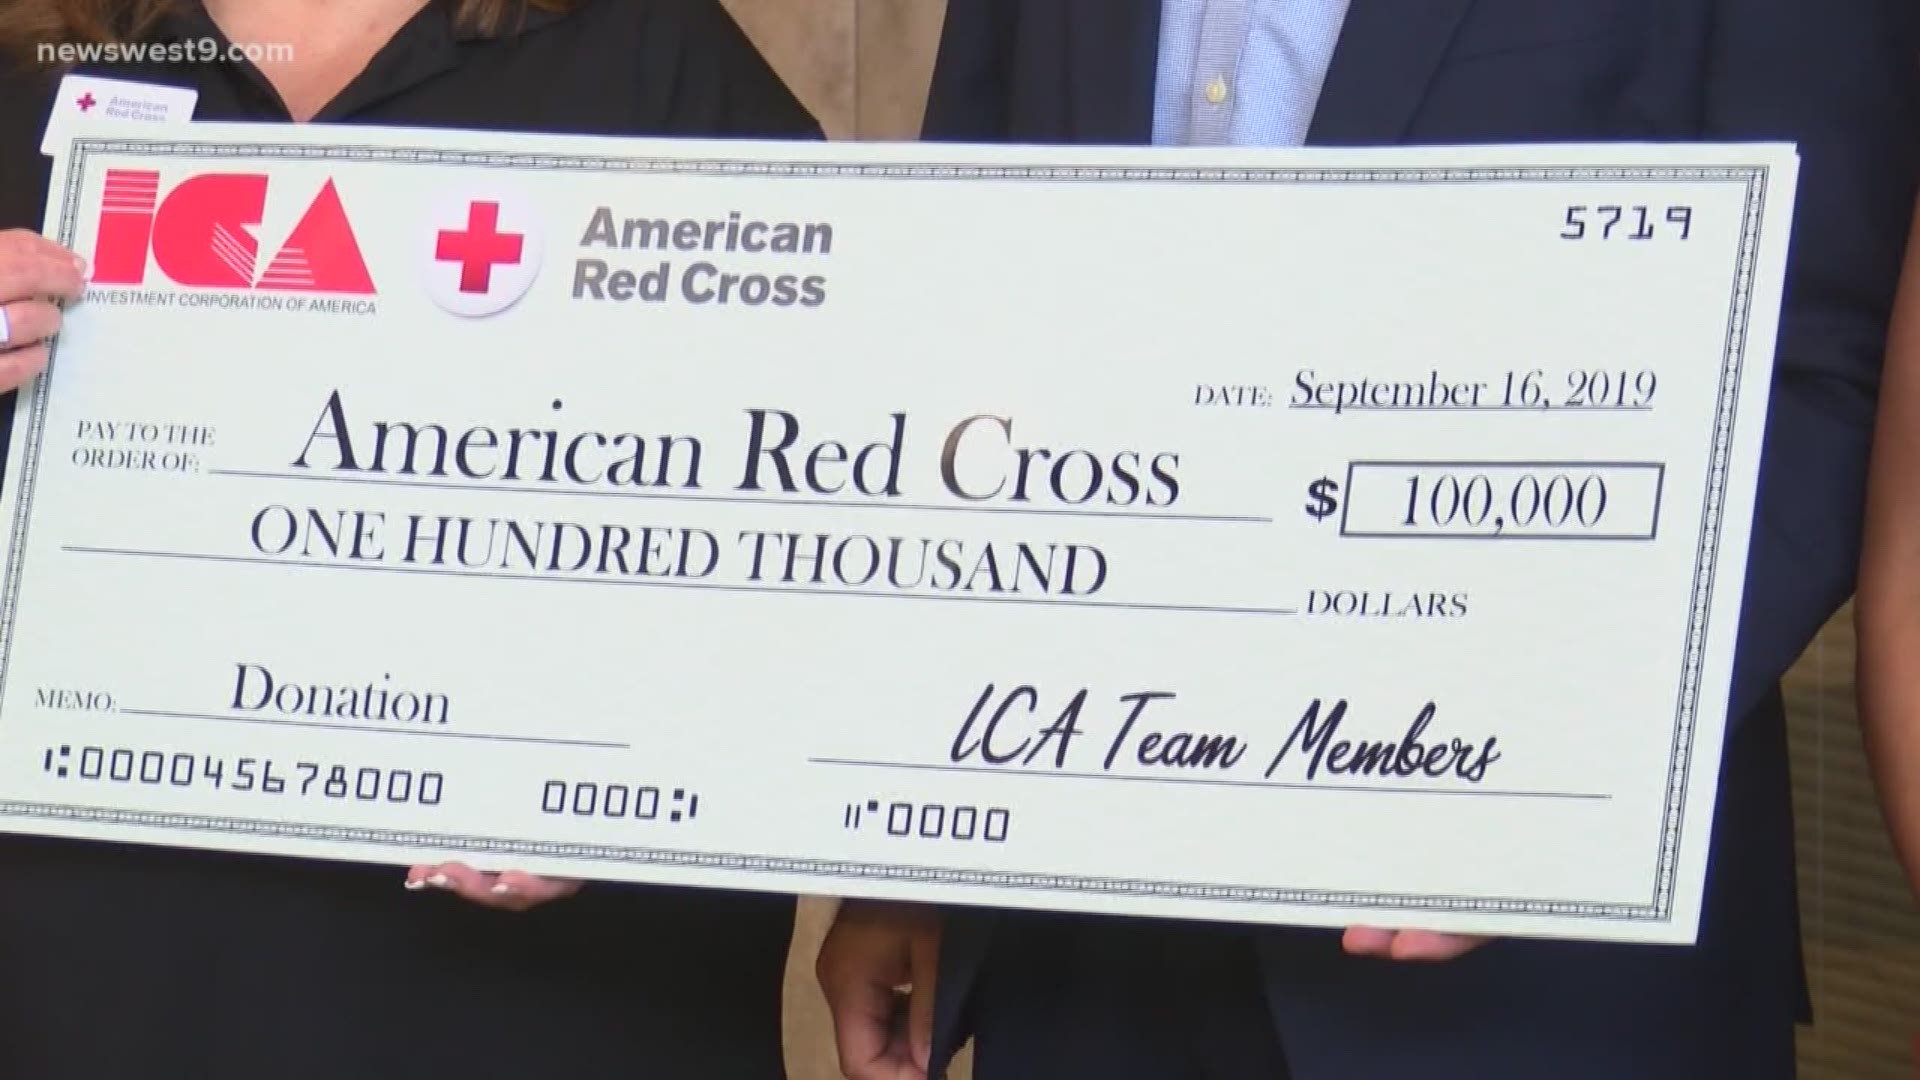 The money will be sent to the American Red Cross and designated for hurricane relief.